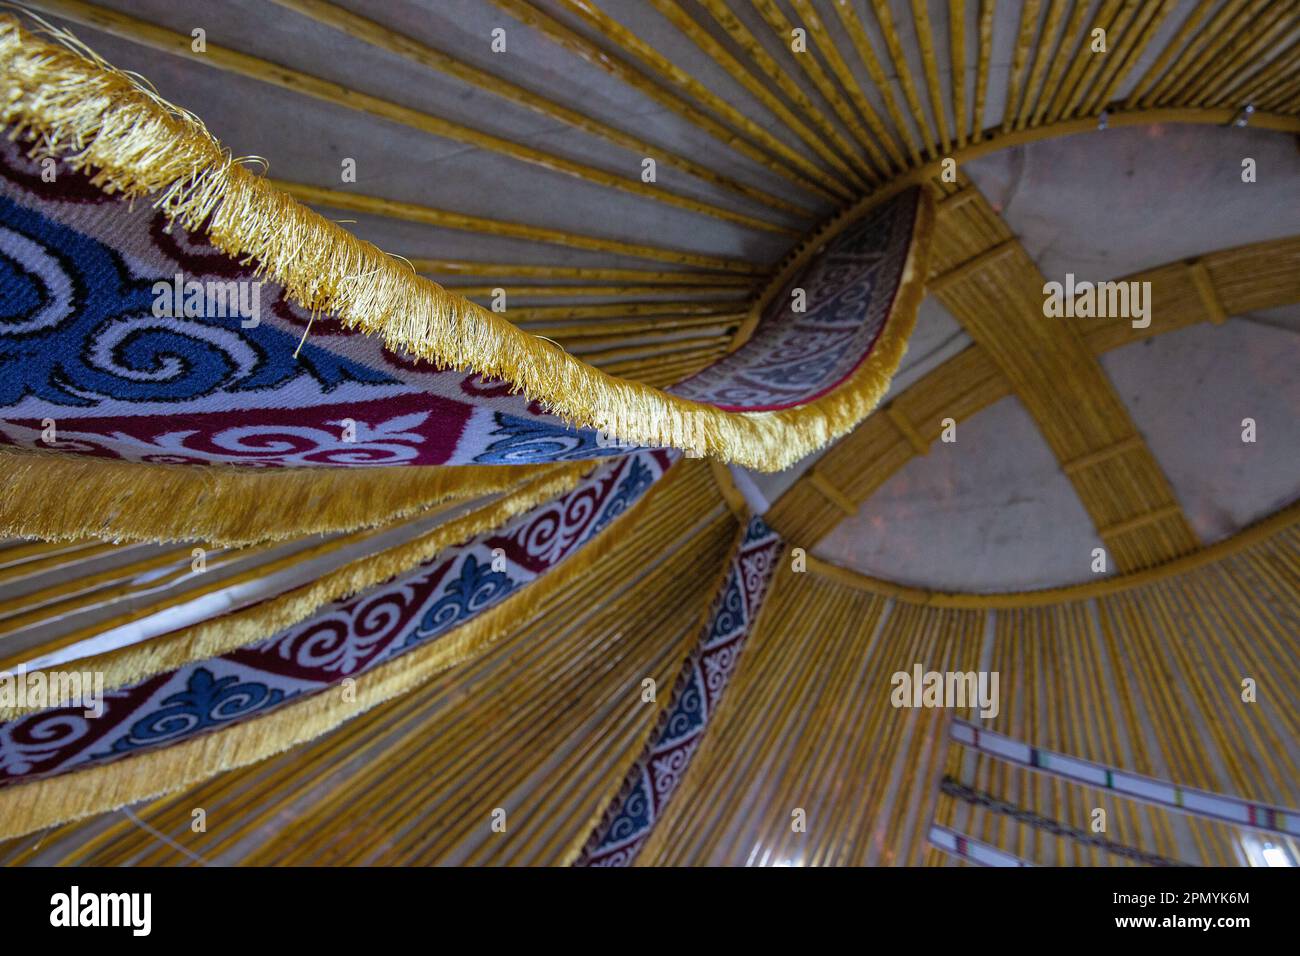 Kazakh yurt interior. Shanyrak, a round hole in the dome of the yurt is a symbol of the house. Stock Photo